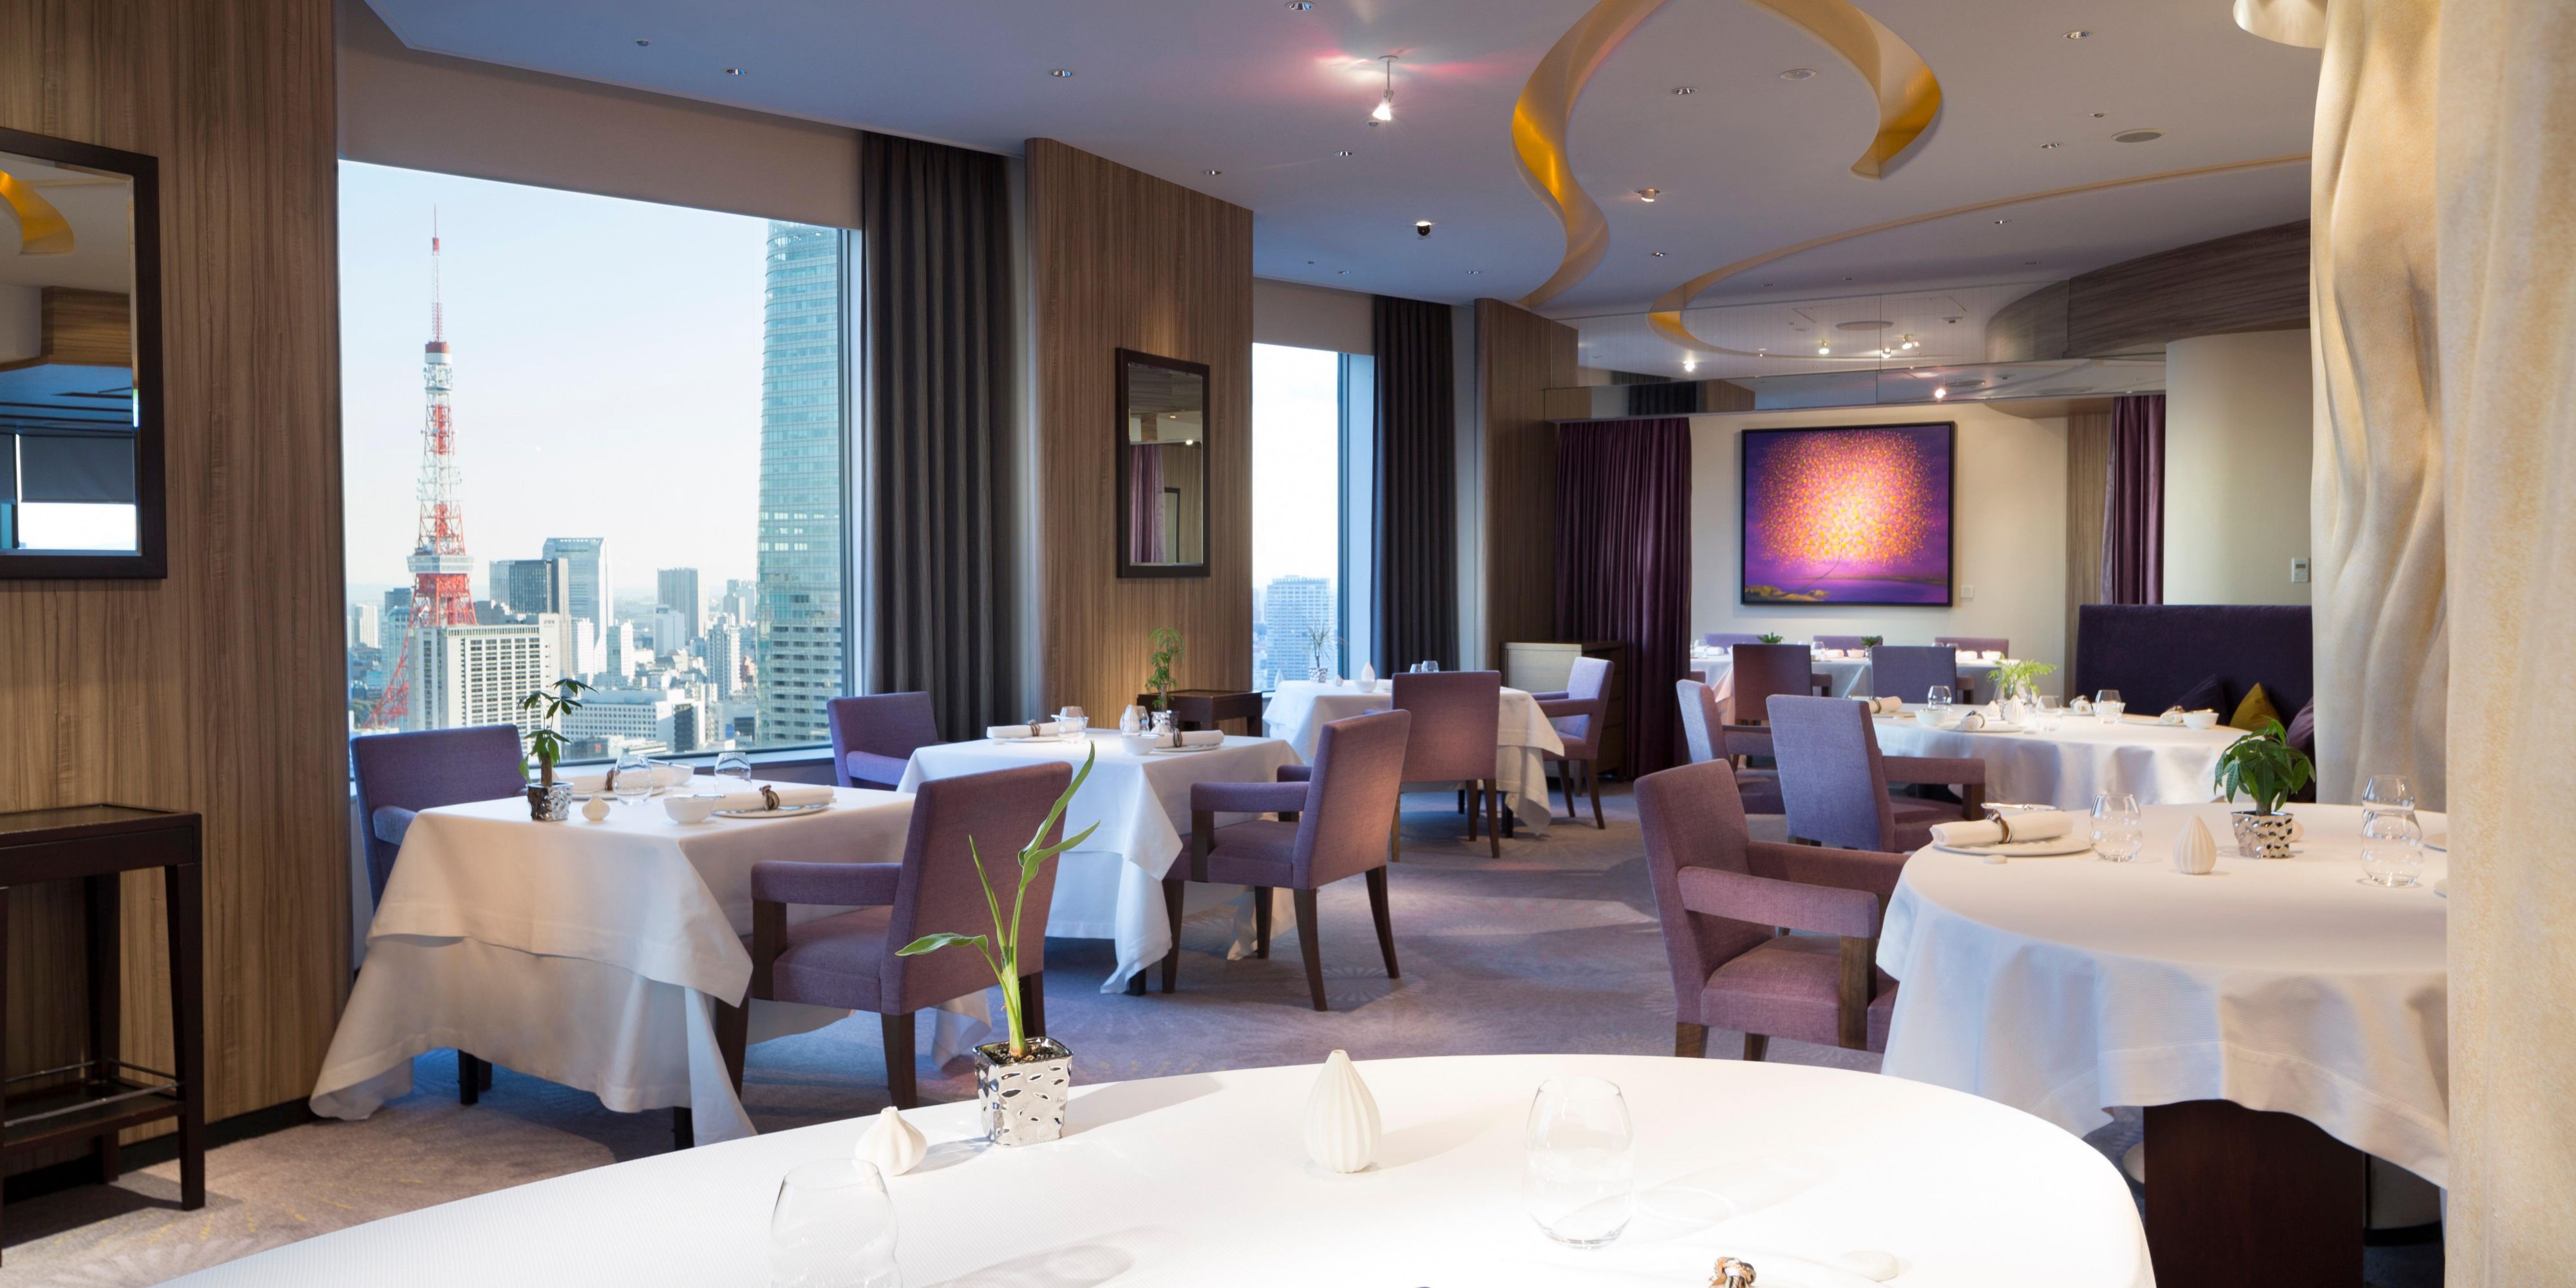 The ANA InterContinental Tokyo is home to Michelin-starred Chef Pierre Gagnaire's highest restaurant in the world. Discover his award-winning contemporary French cuisine in elegant surrounds with the stunning Tokyo metropolis and Tokyo Tower as a backdrop.